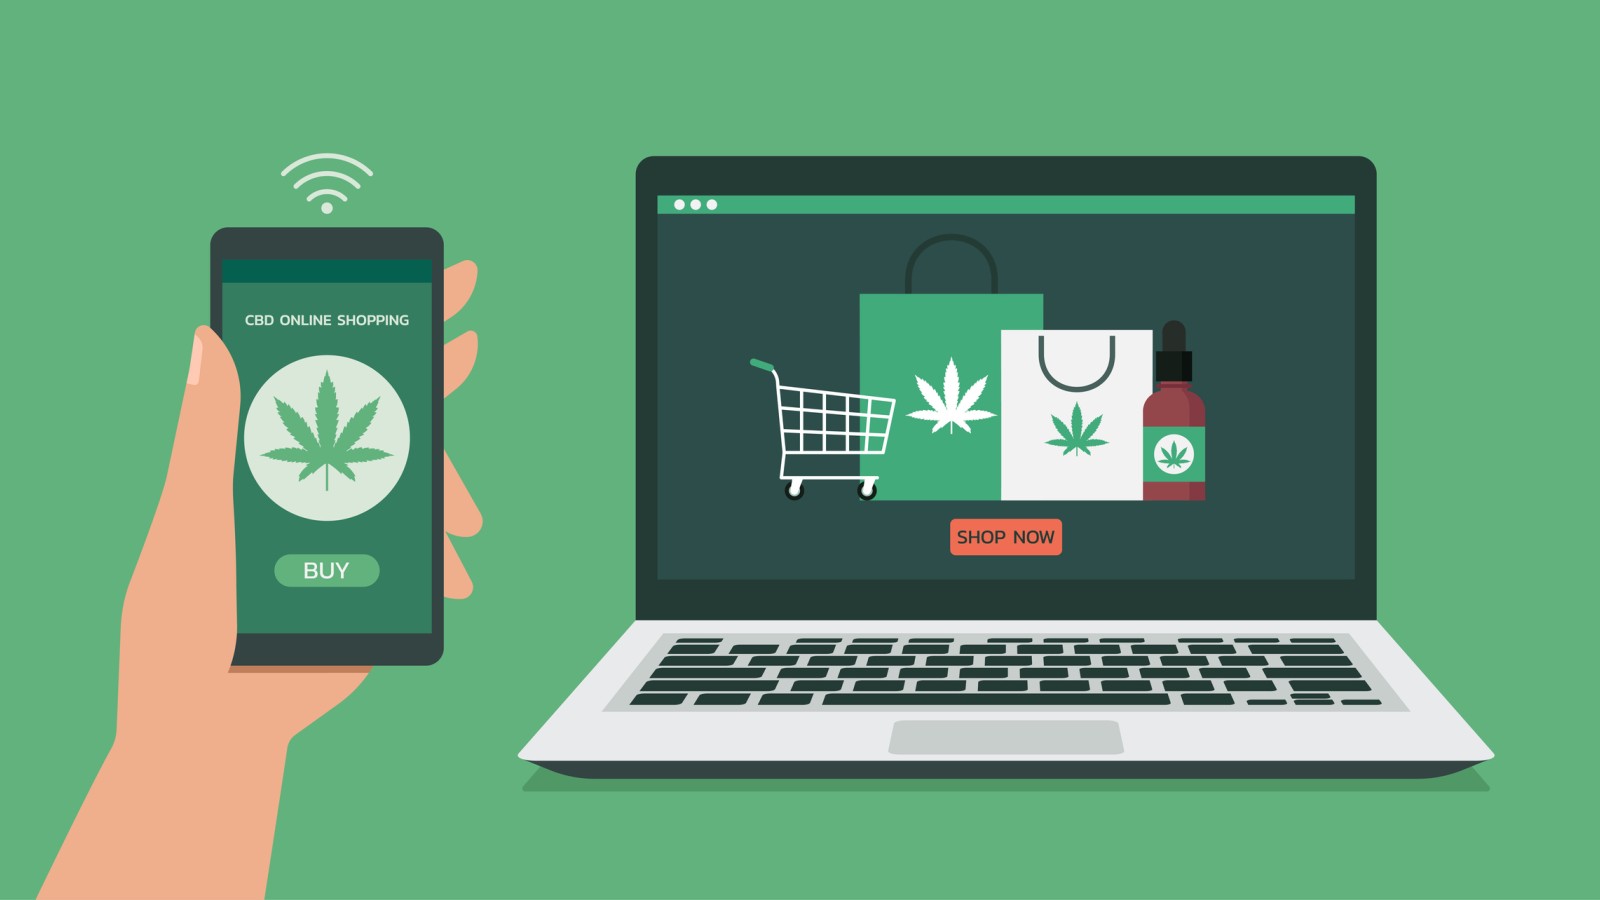 Carton image of a hand holding a phone ordering cannabis from an e-commerce site.